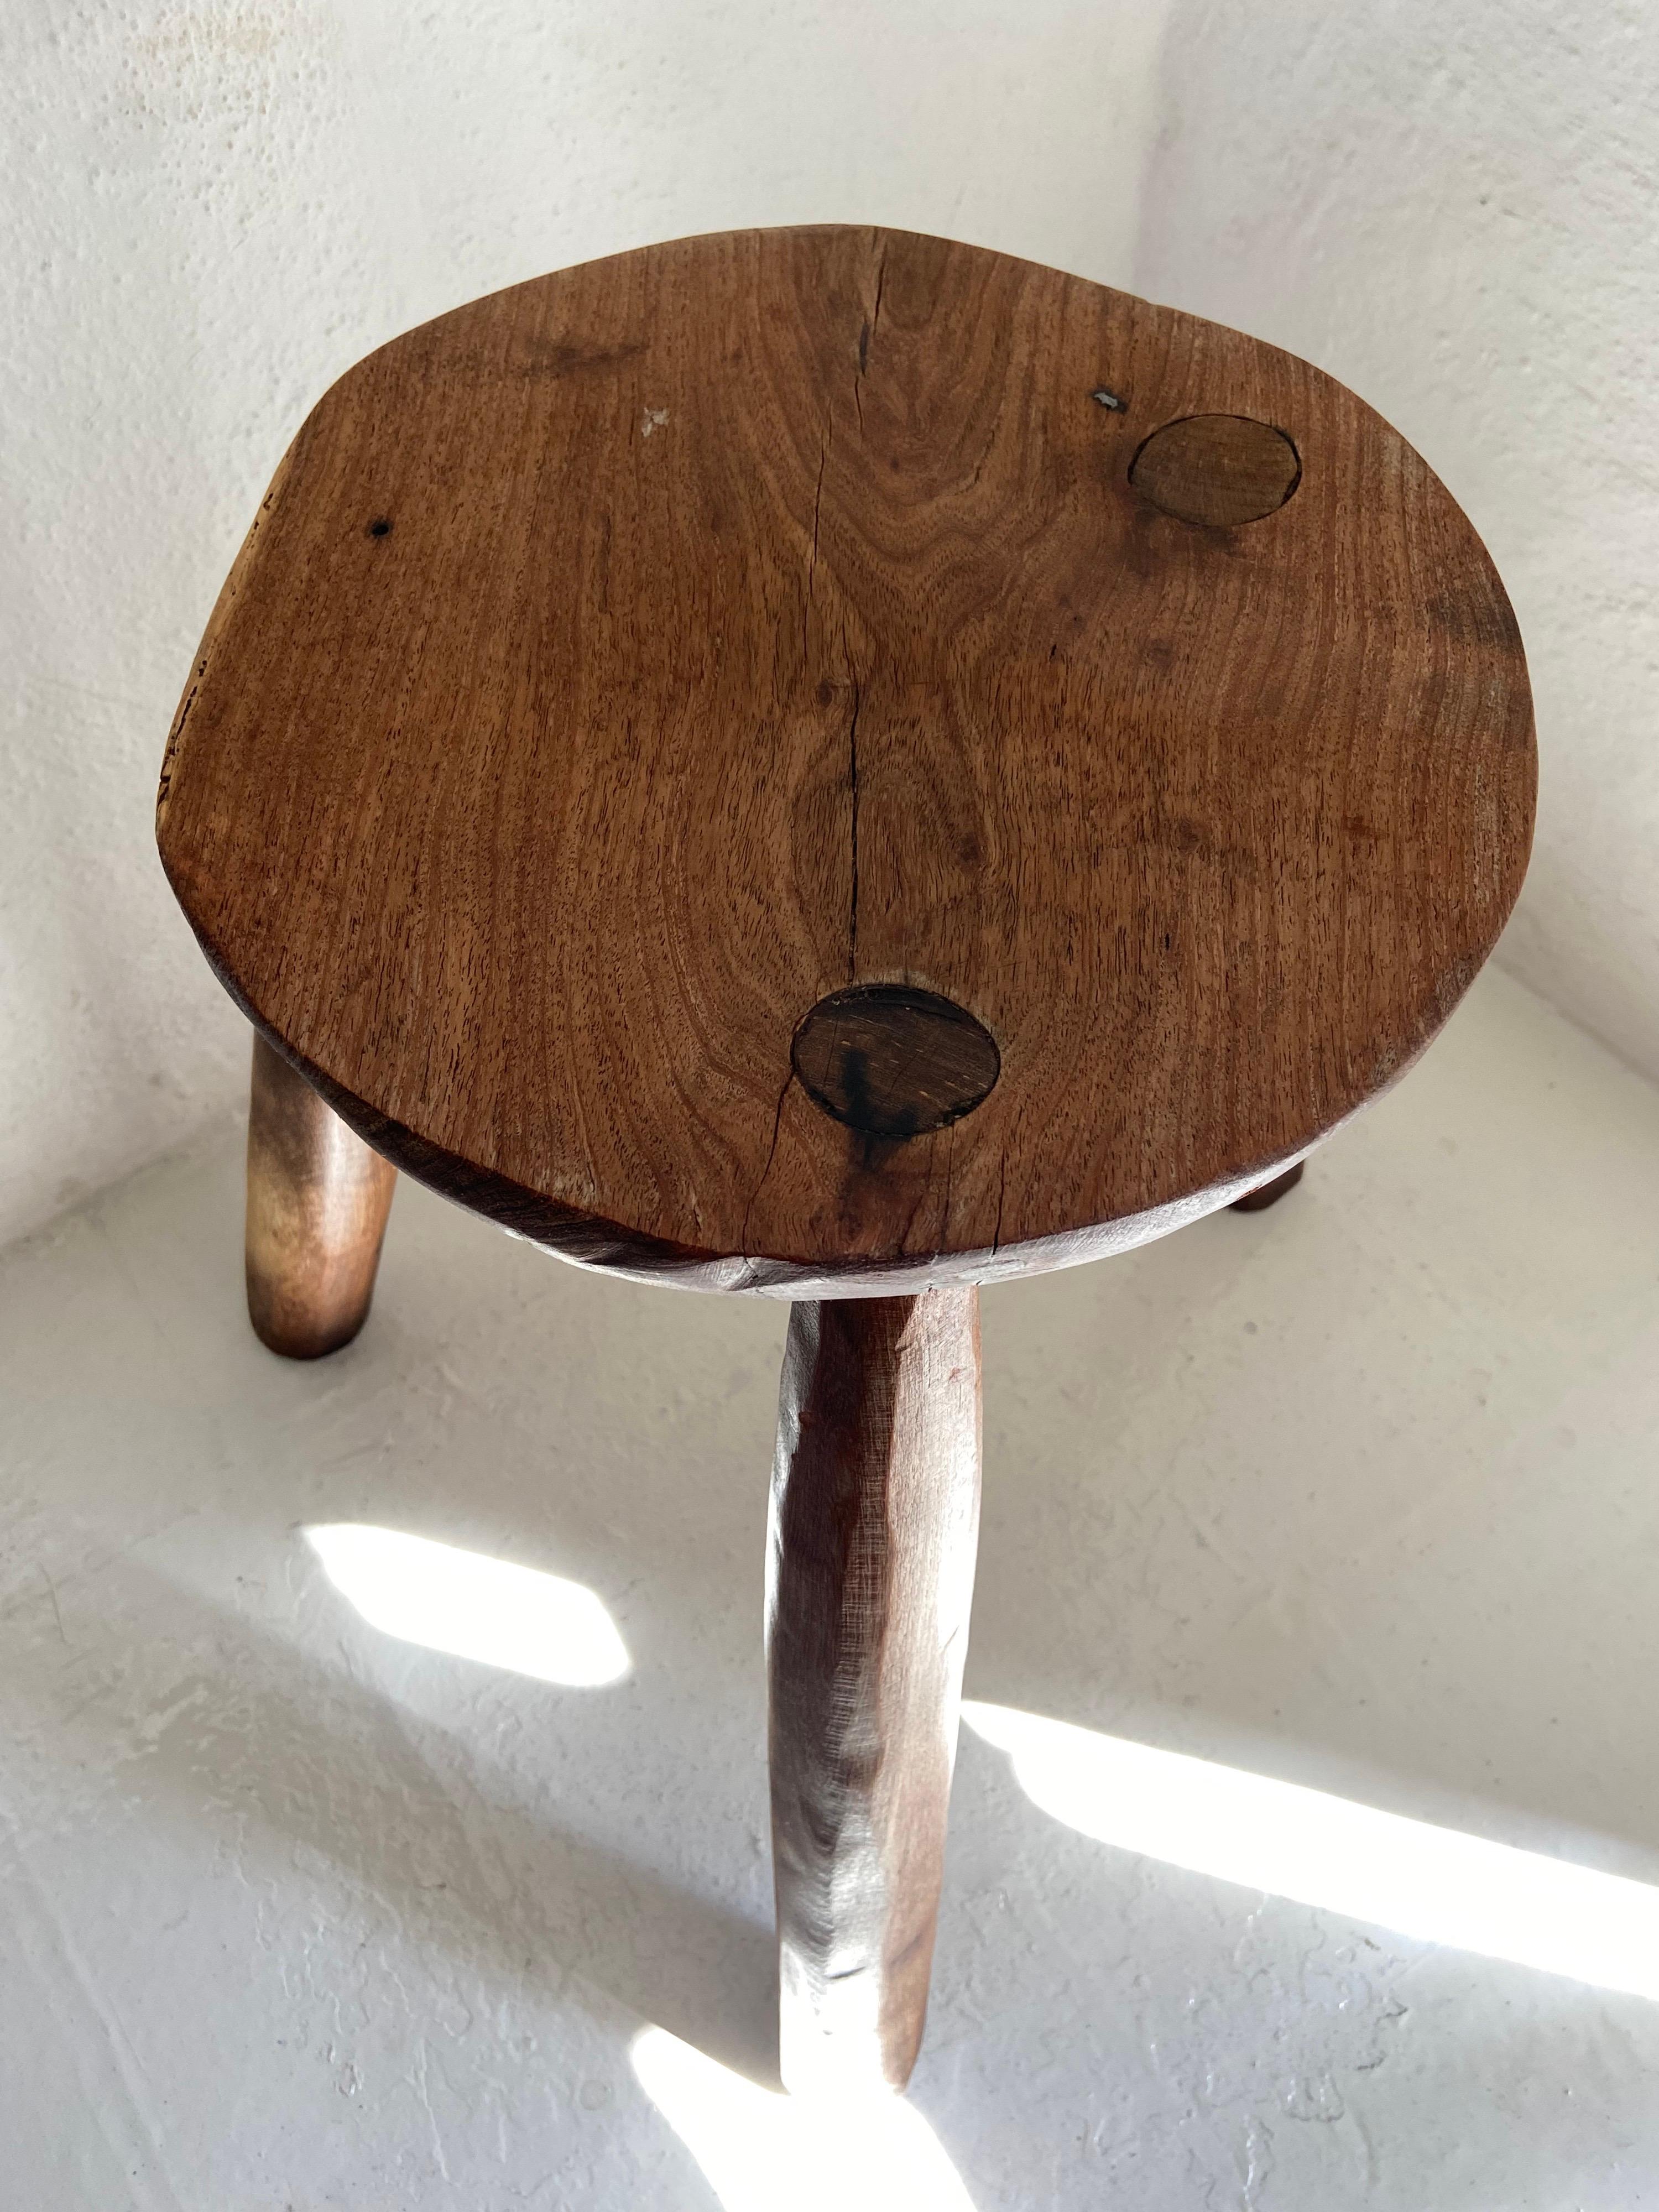 Mexican Hardwood Stool from Mexico, circa 1970s